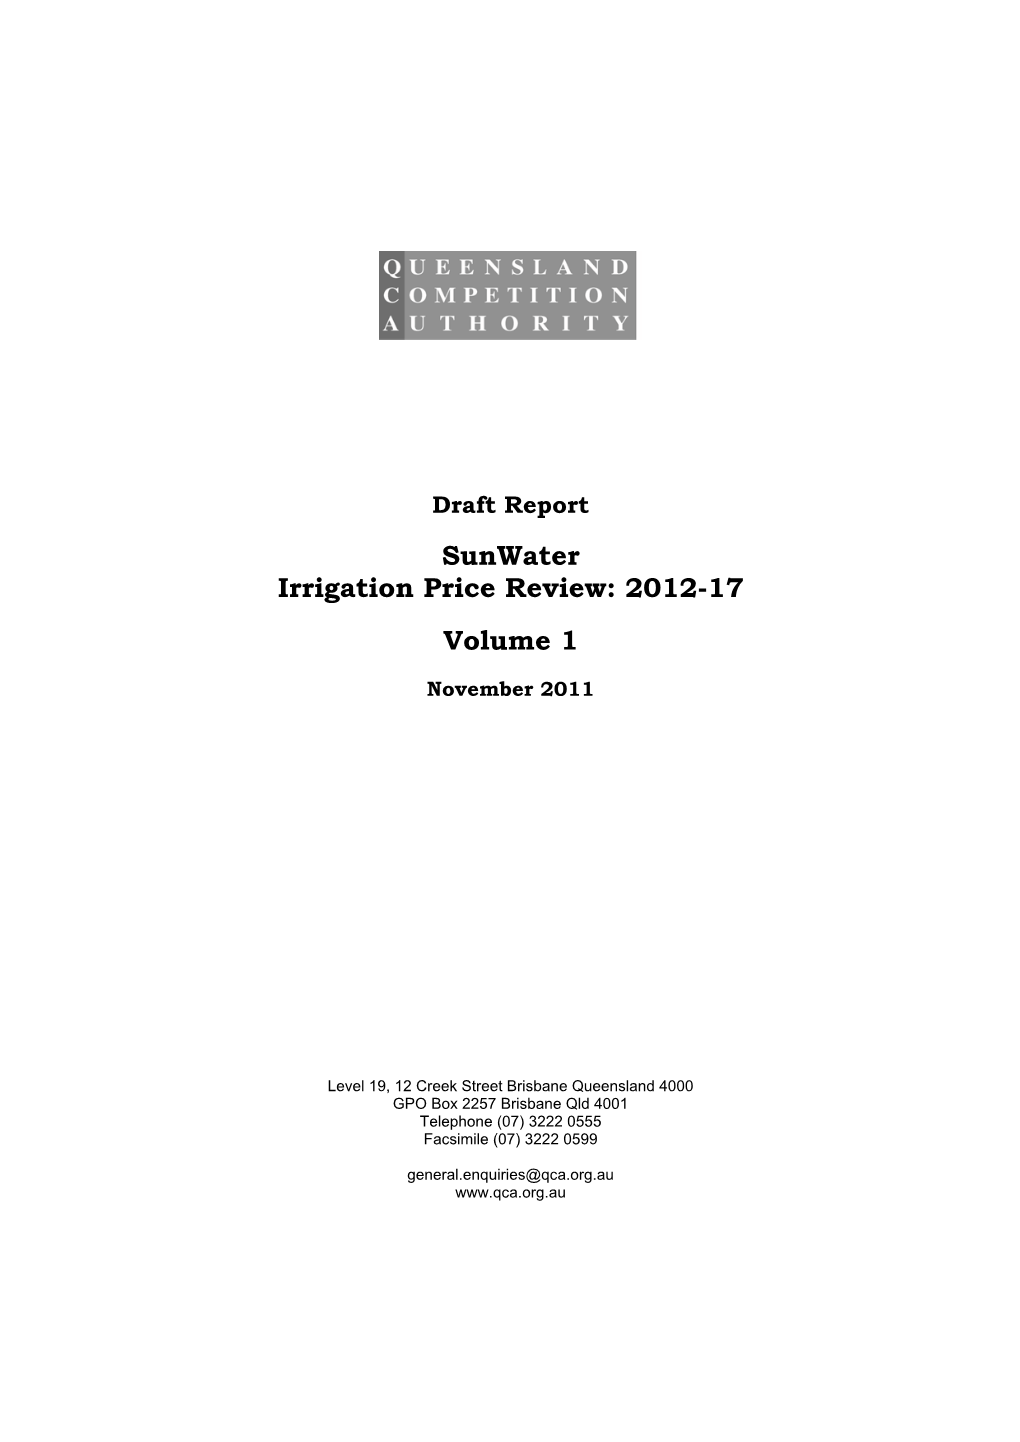 Sunwater Irrigation Price Review: 2012-17 Volume 1